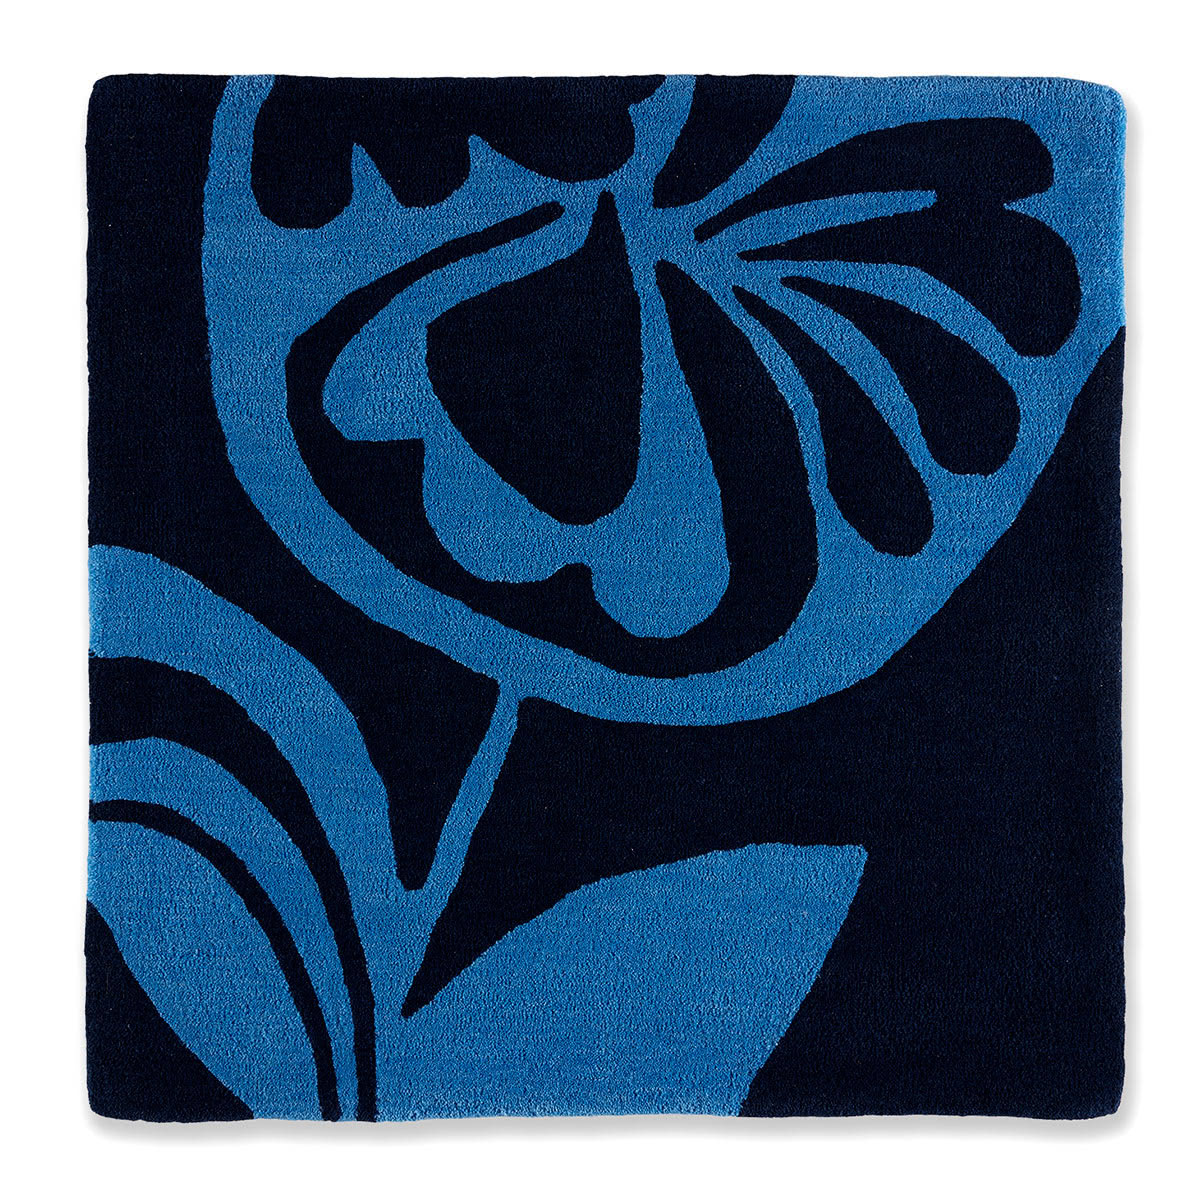 An abstract blue flower pattern on a square rug.